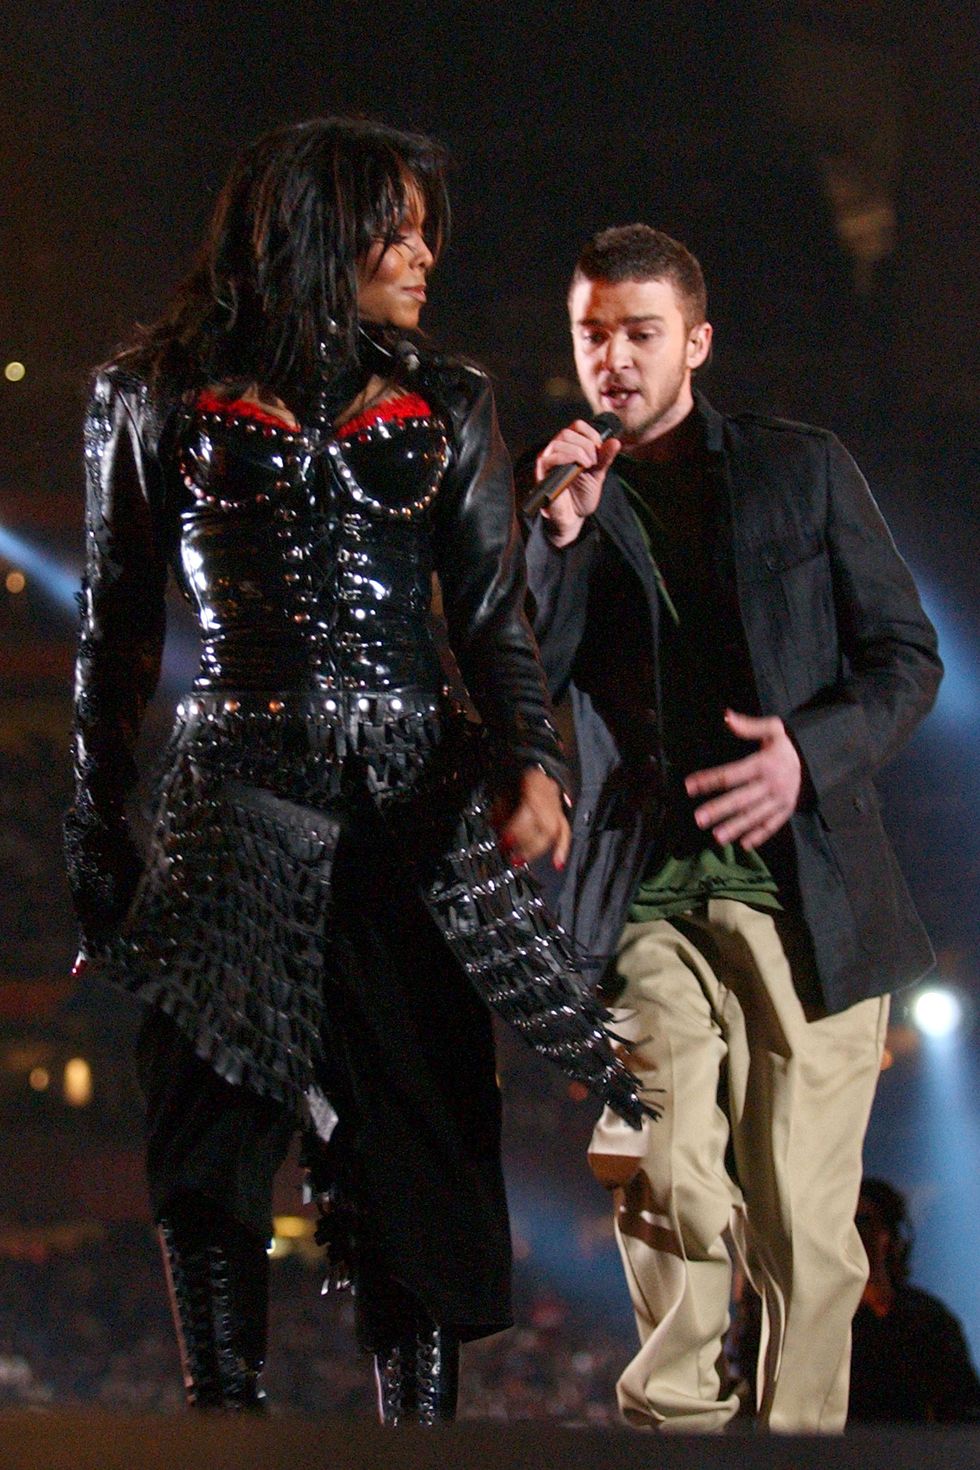 janet jackson and justin timberlake walk on a stage as he sings into a microphone, she wears a mostly black outfit, he wears a dark jacket over a green shirt and khaki pants